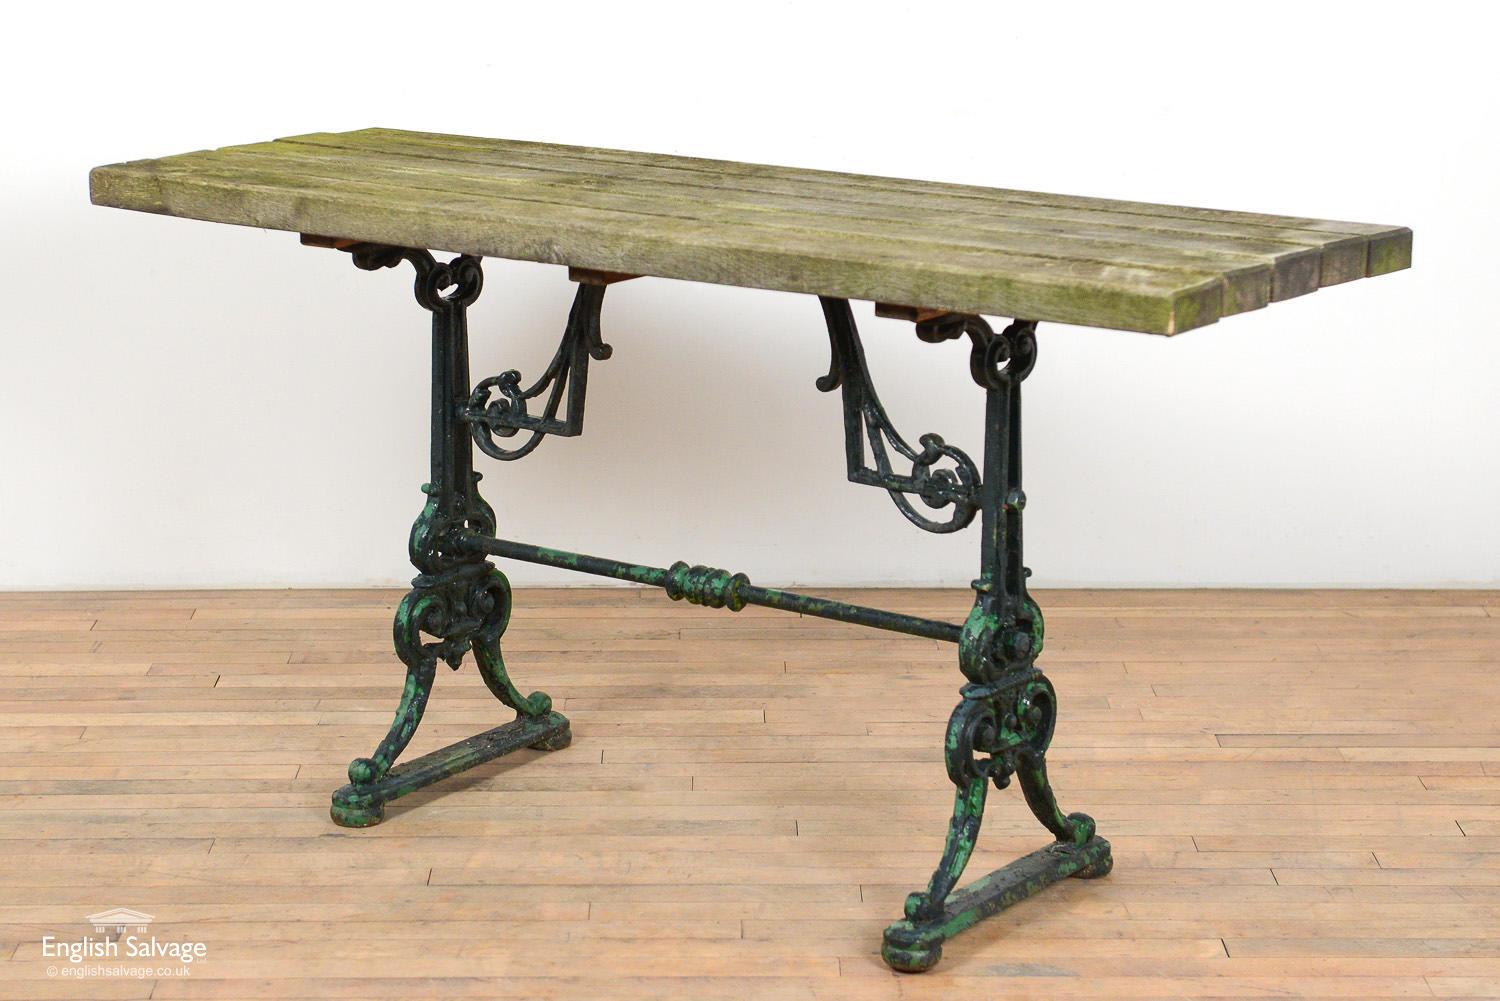 Salvaged table with cast iron base in ornate scrolling and angular design. Peeling paint remnants give it a weathered patina. Rustic top made up of five narrow and thick boards.